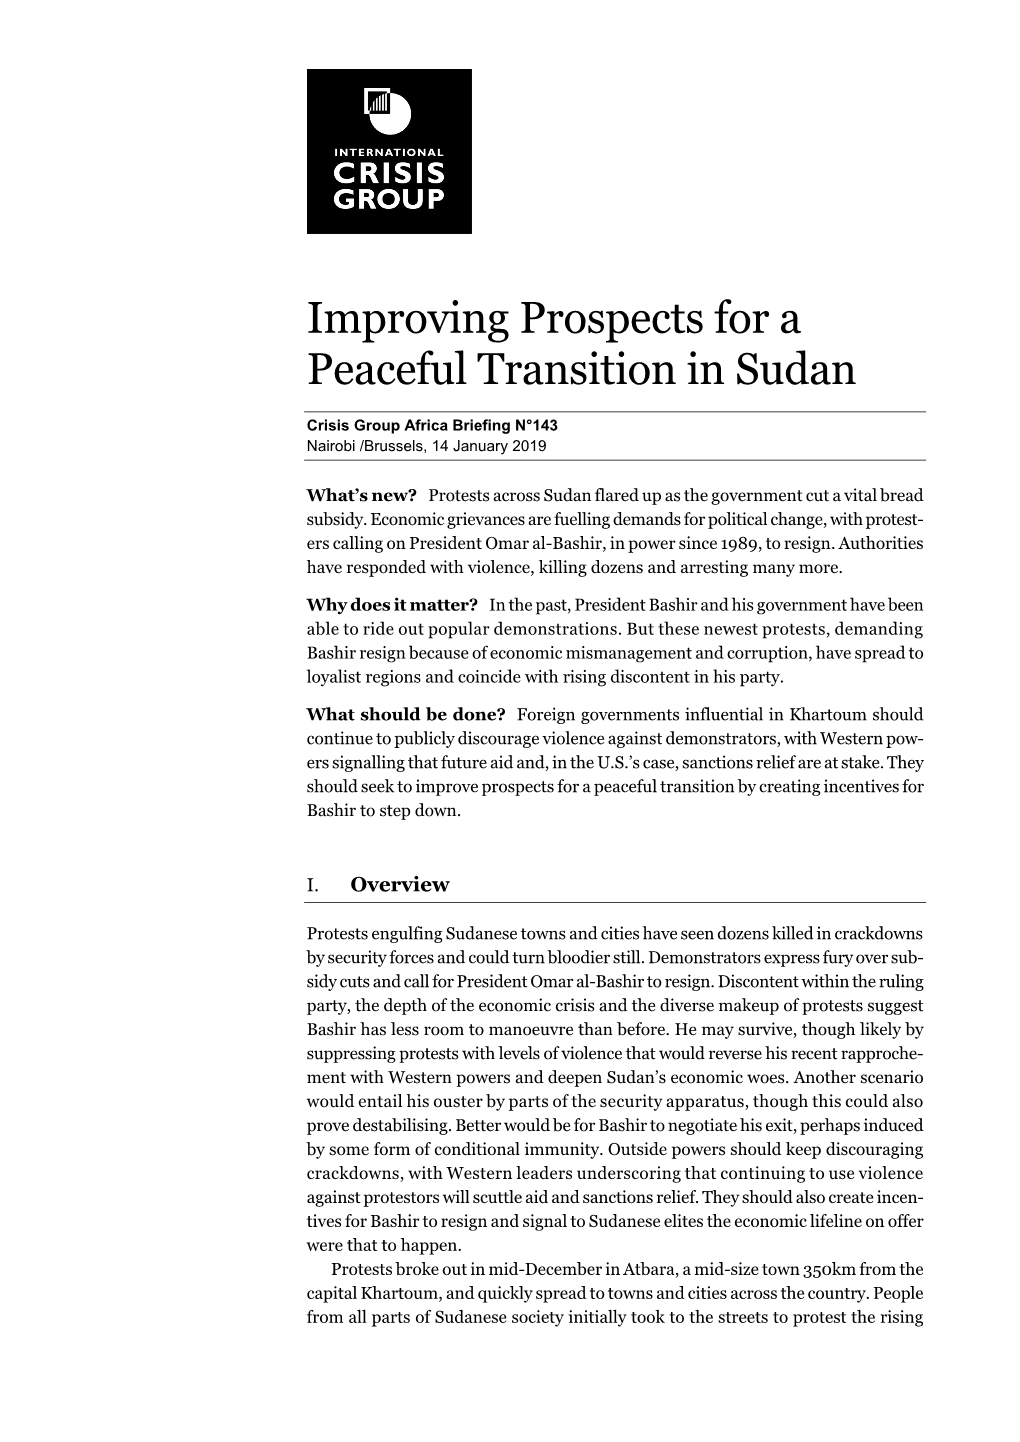 Improving Prospects for a Peaceful Transition in Sudan